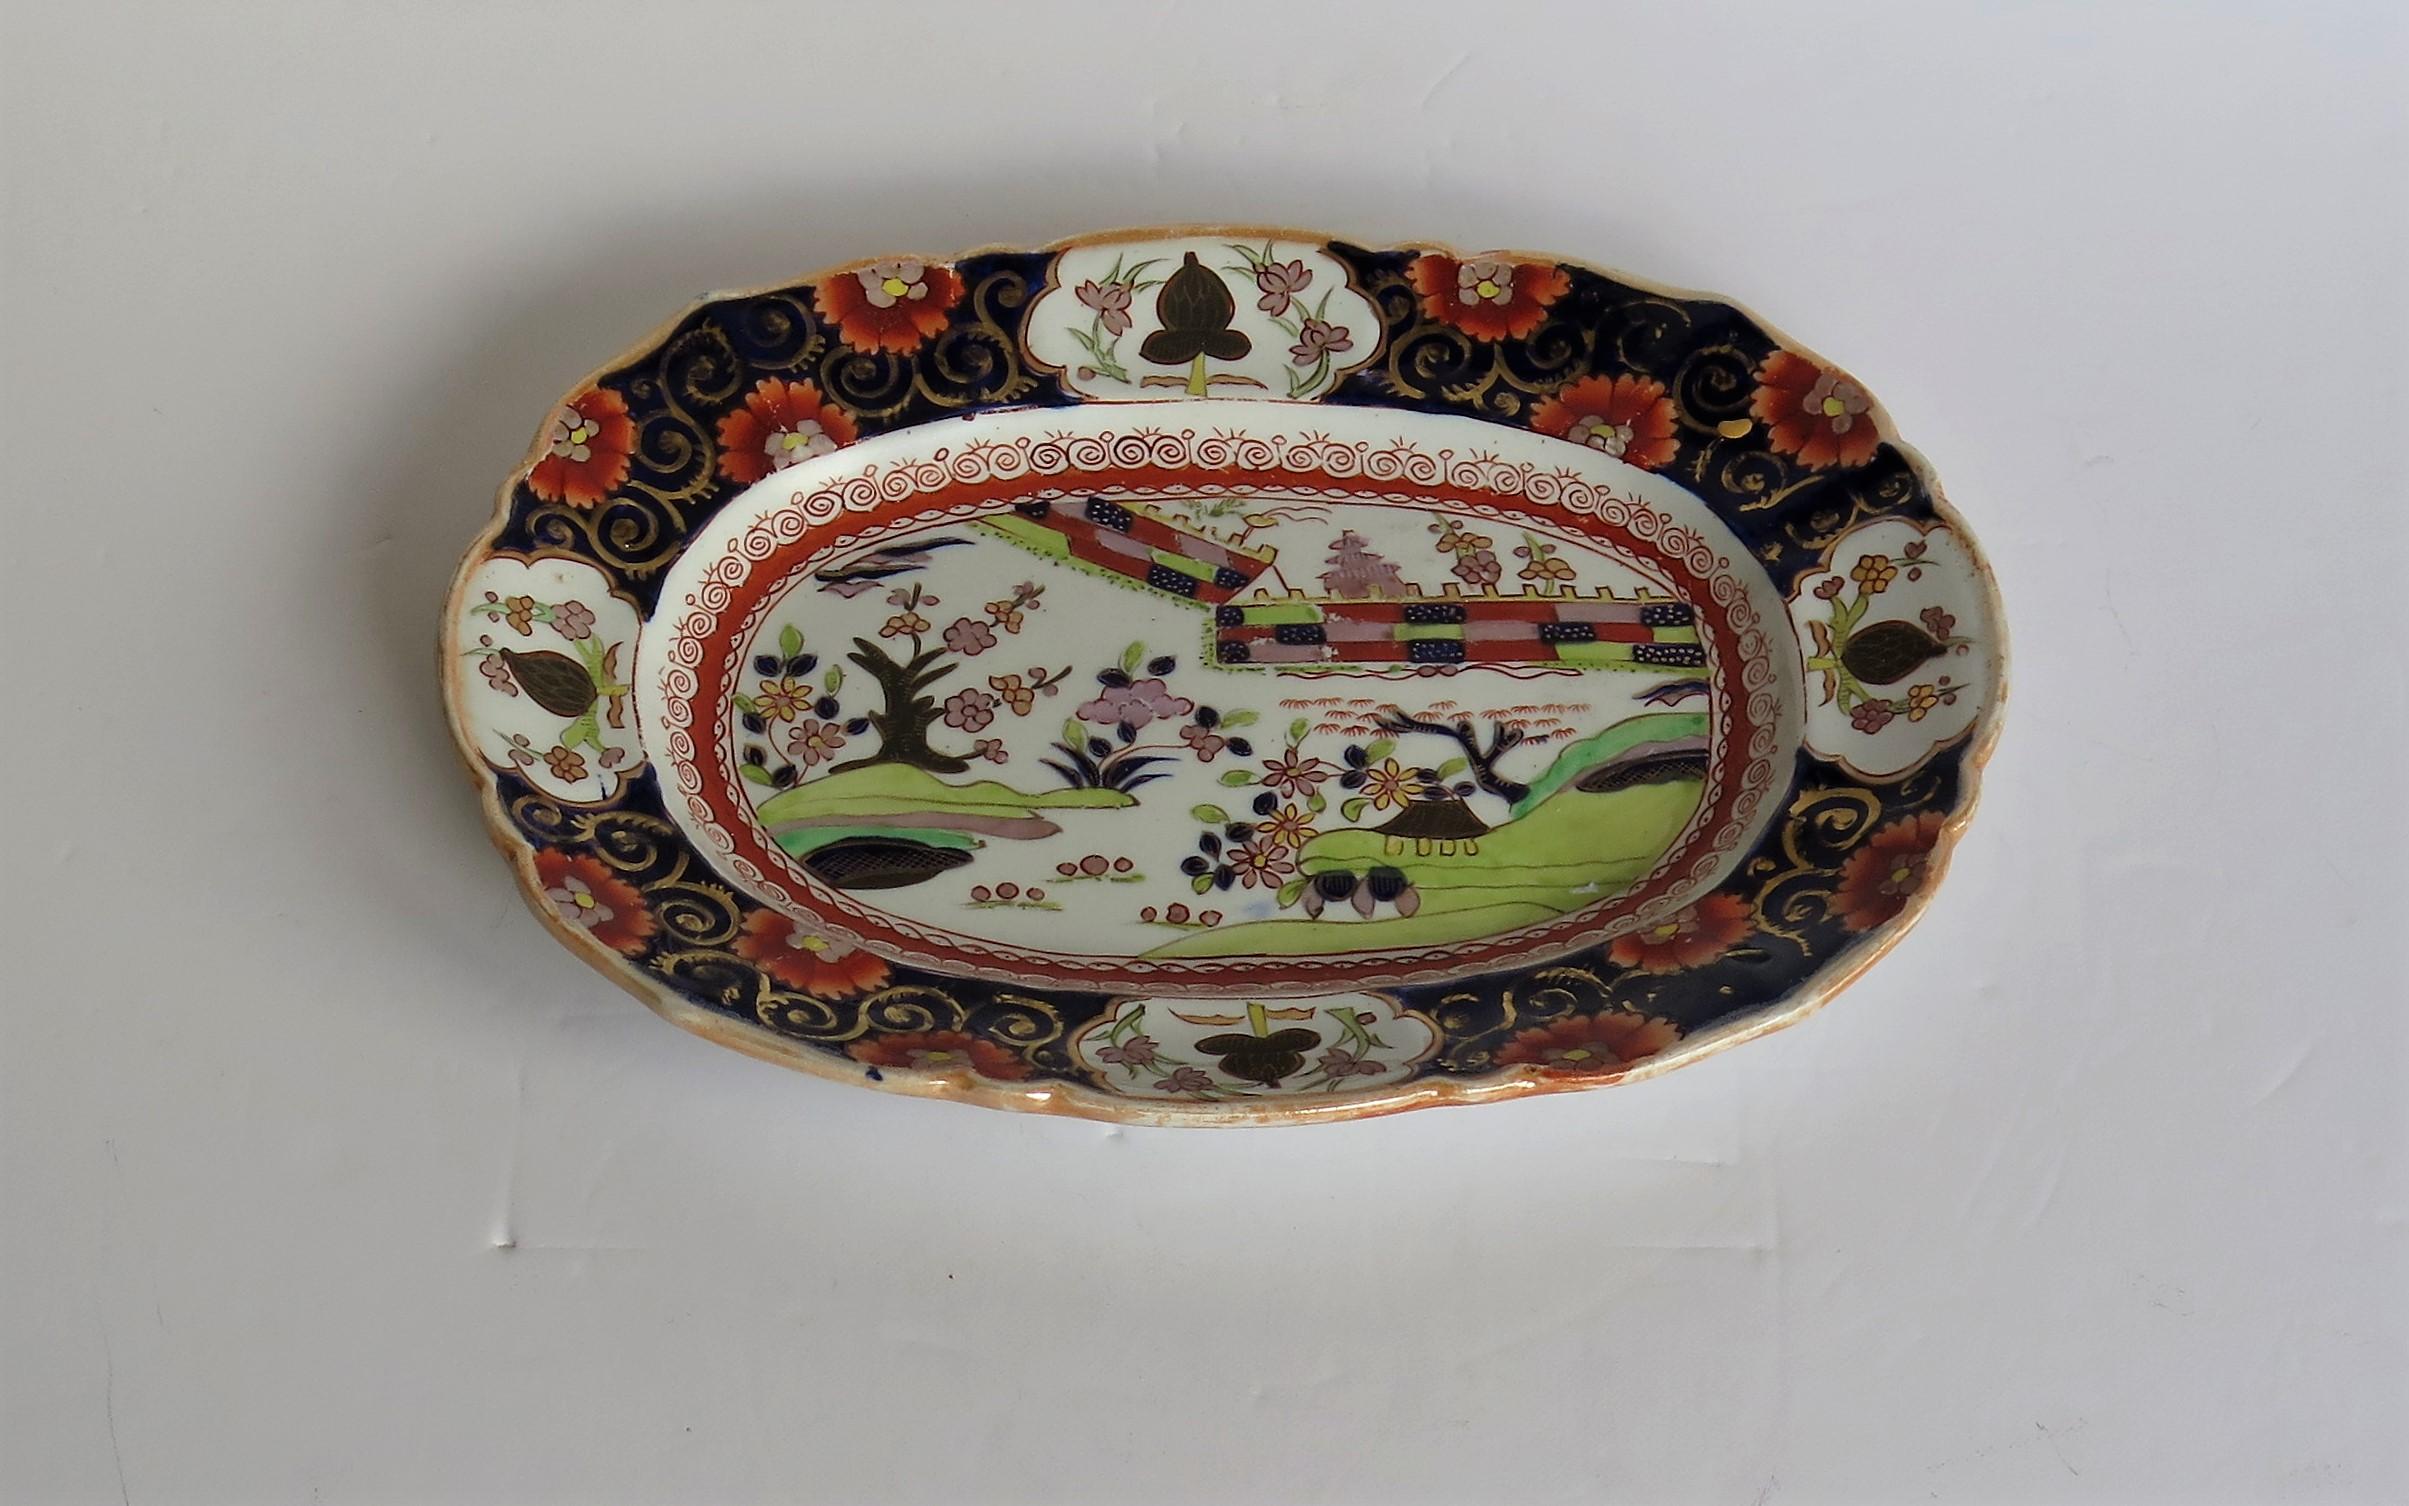 English Early Mason's Ironstone Platter or Plate in Colored Wall Pattern, circa 1825